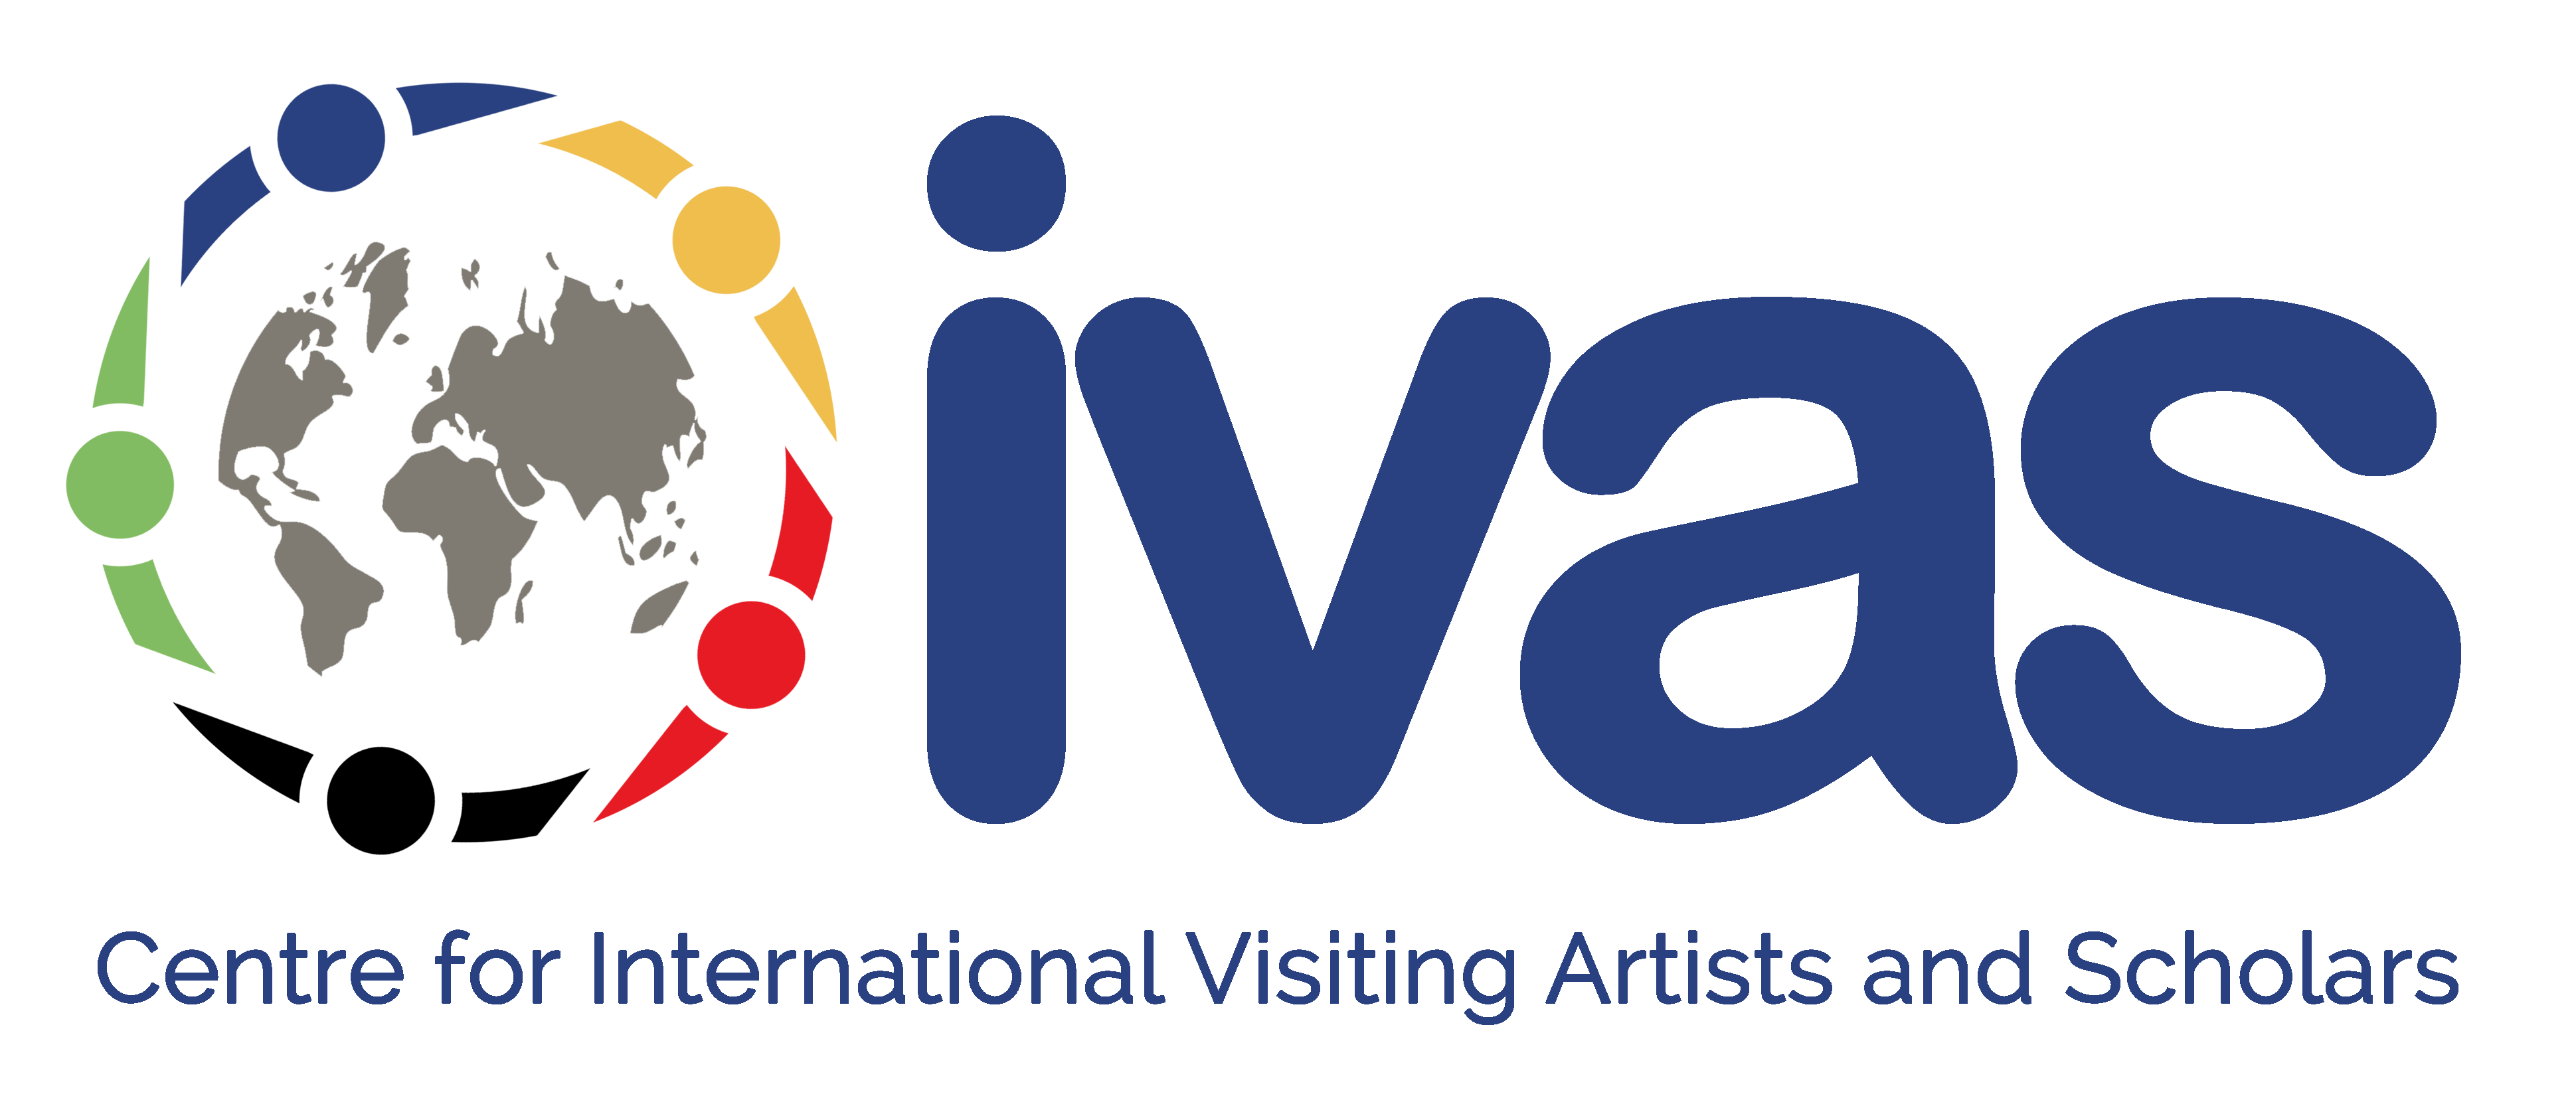 ivas logo - blue font with world map icon